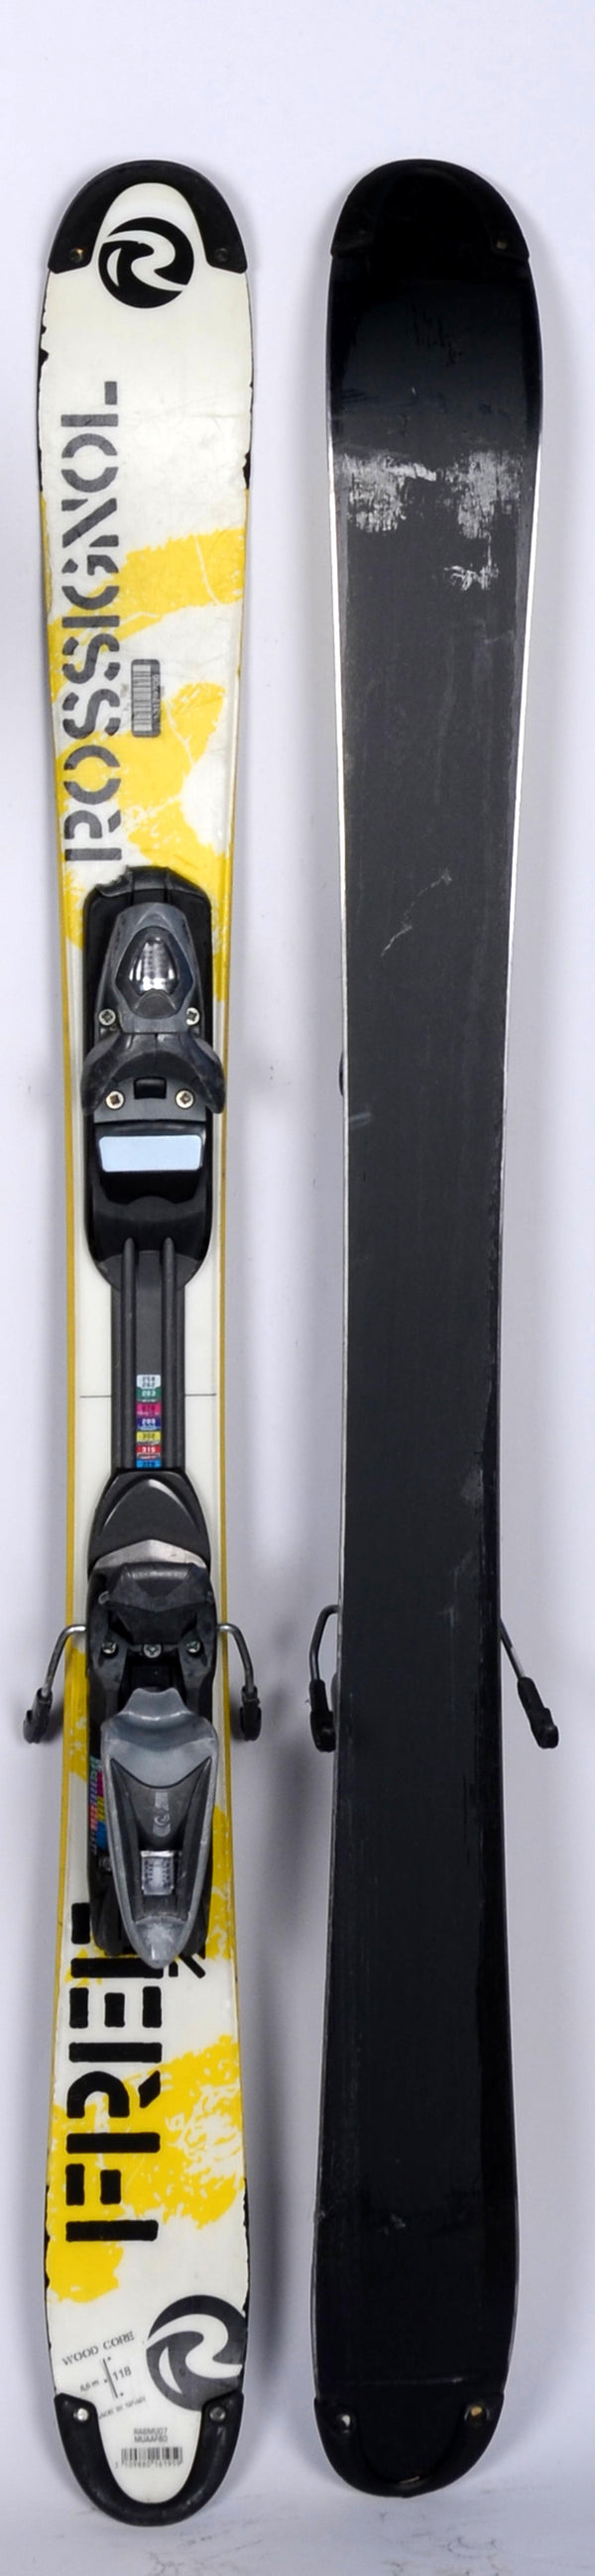 Rossignol FREE ZB yellow - skis d'occasion